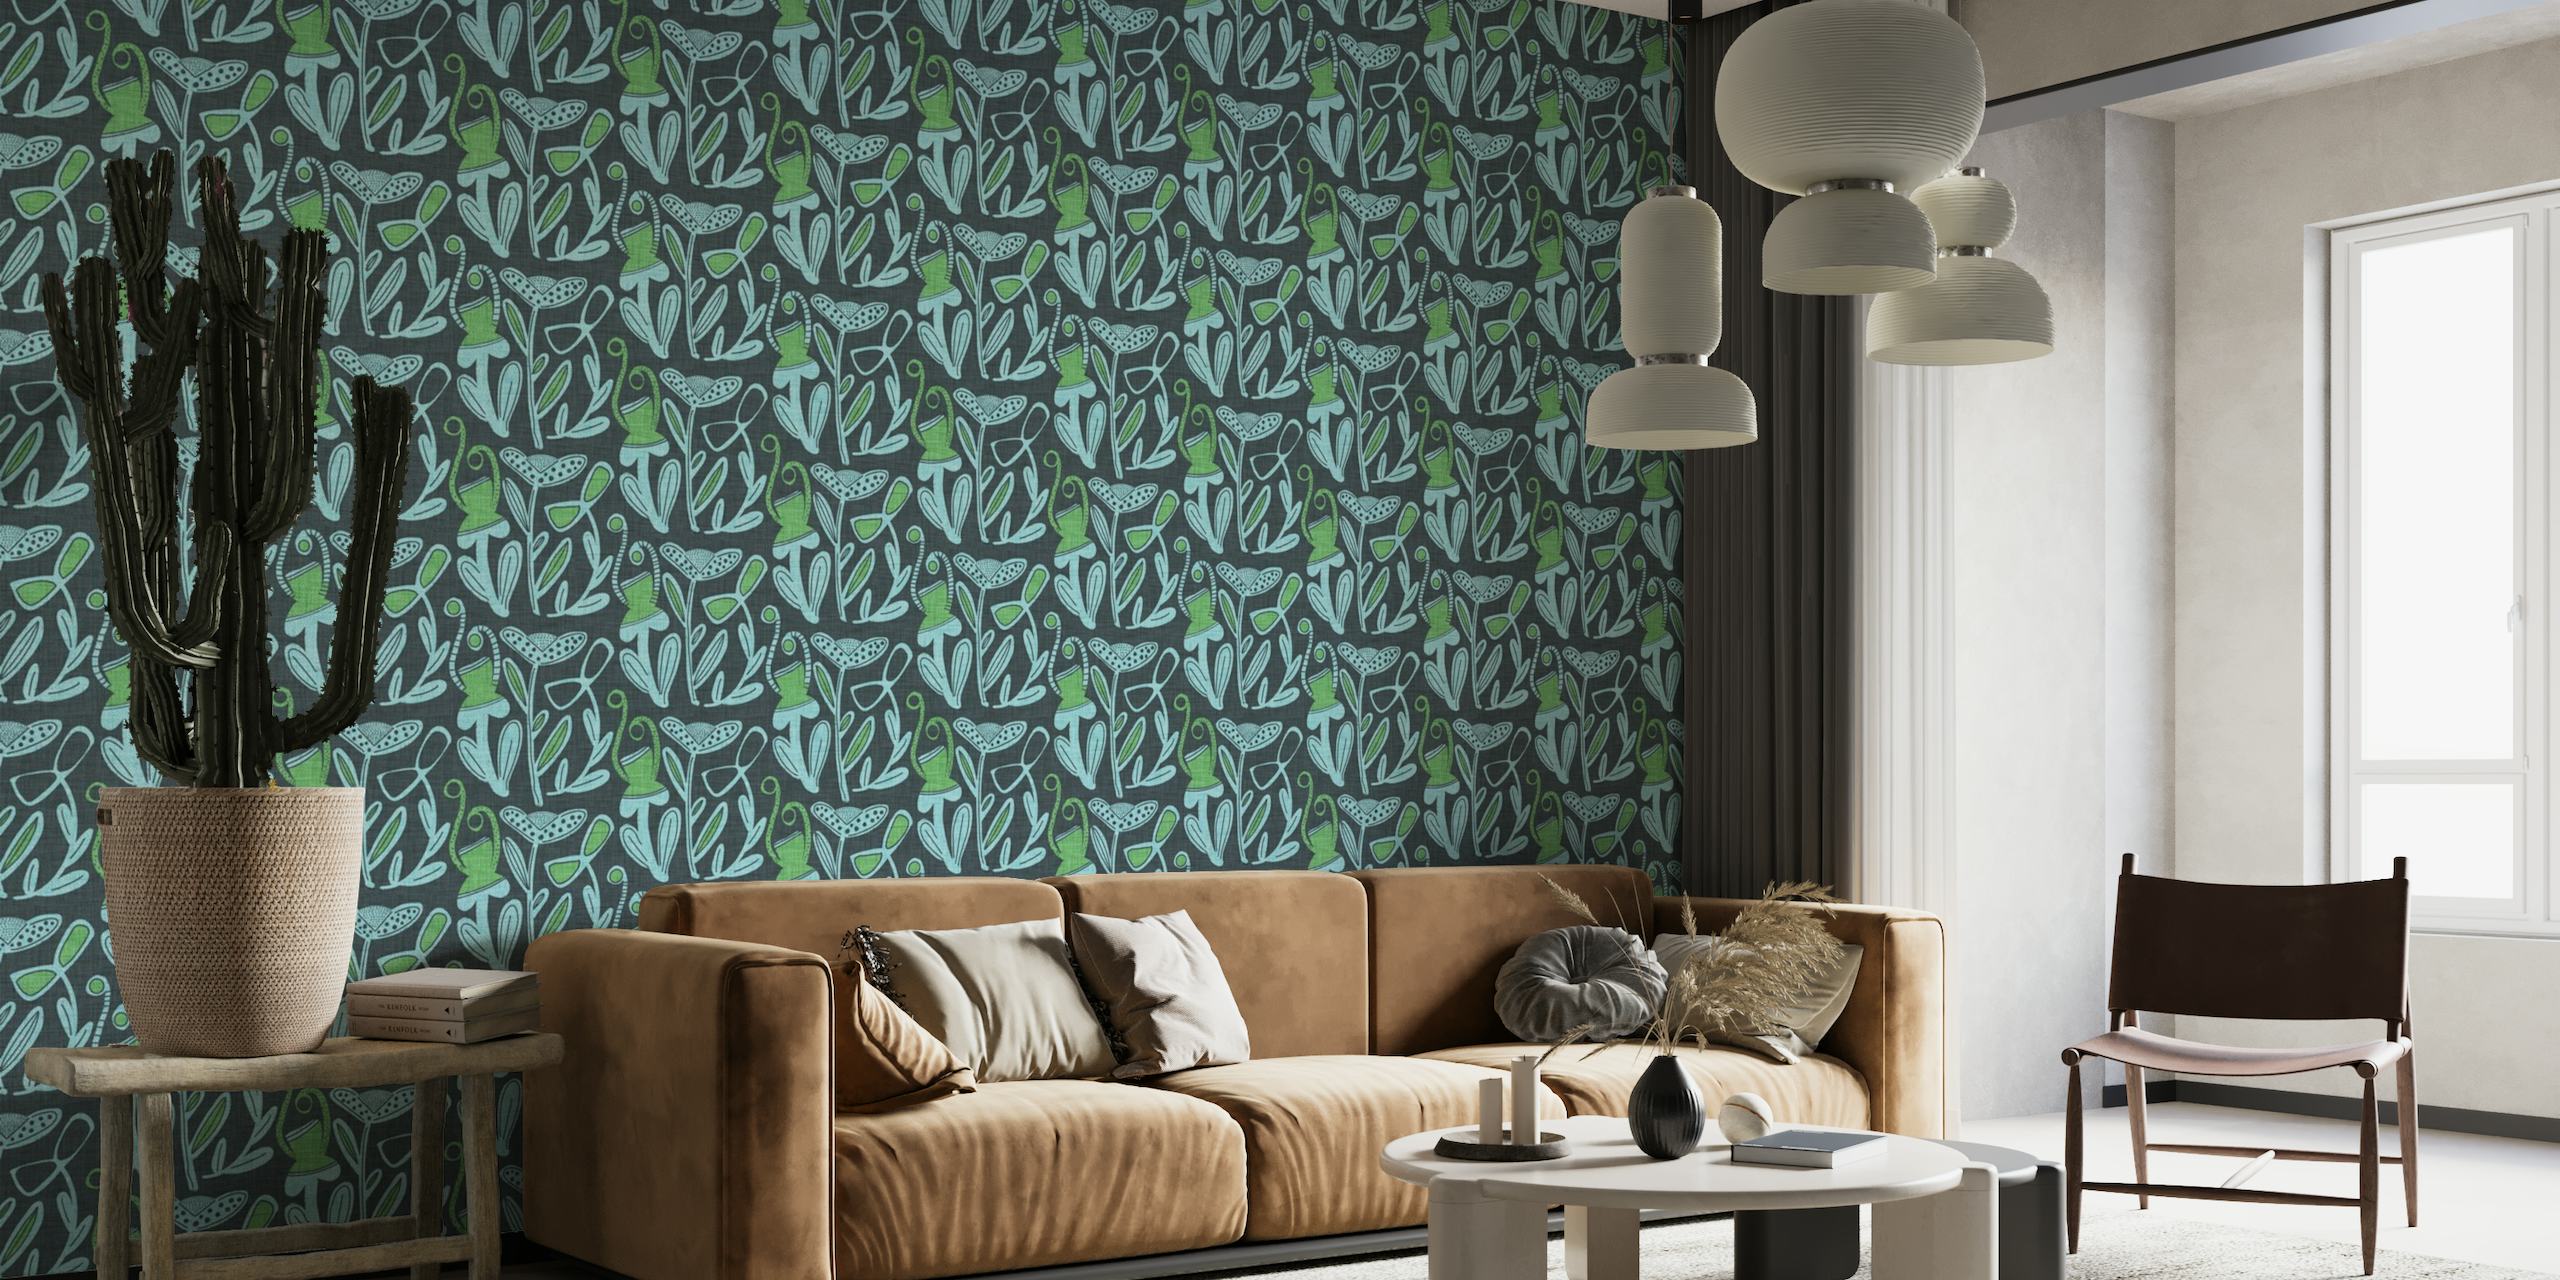 Modern Retro Boho Bold Floral wall mural featuring stylized flowers on a blue and green background